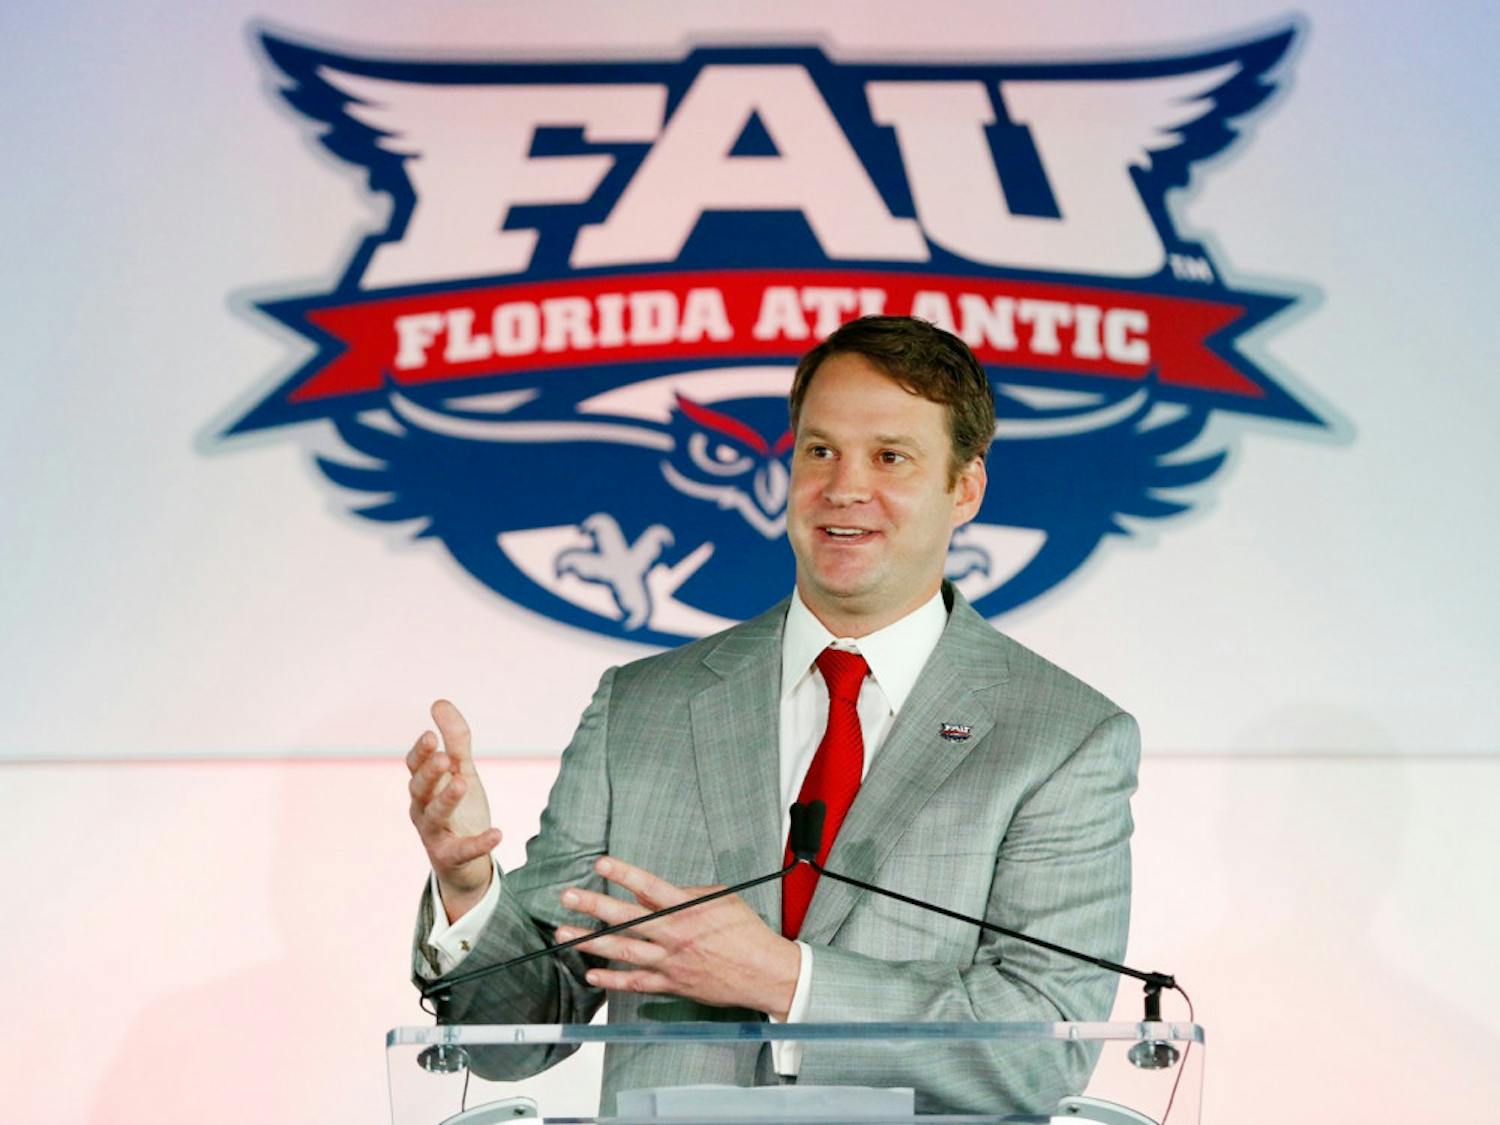 Lane Kiffin speaks at his introductory press conference at FAU's football coach on Dec. 13, 2016, in Boca Raton, Florida.